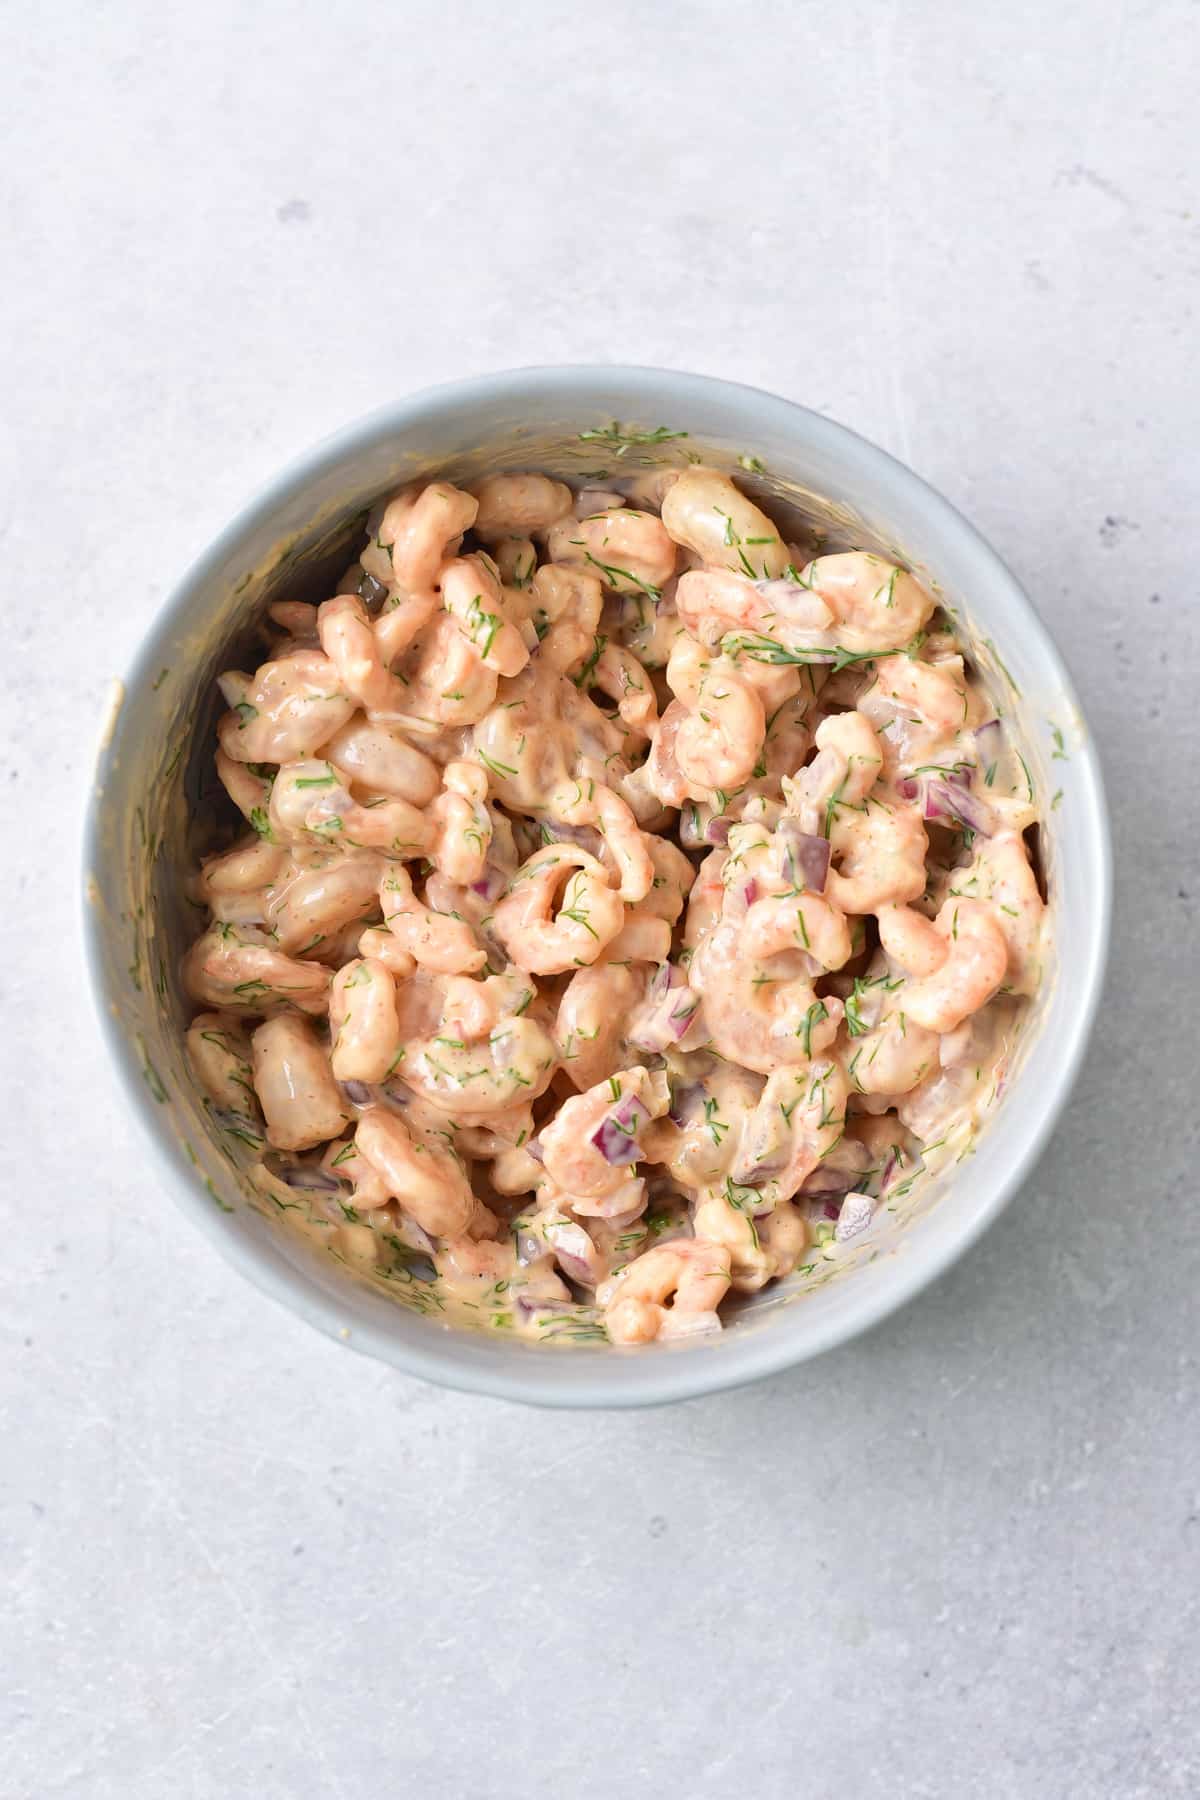 The shrimp salad mixed in a bowl.